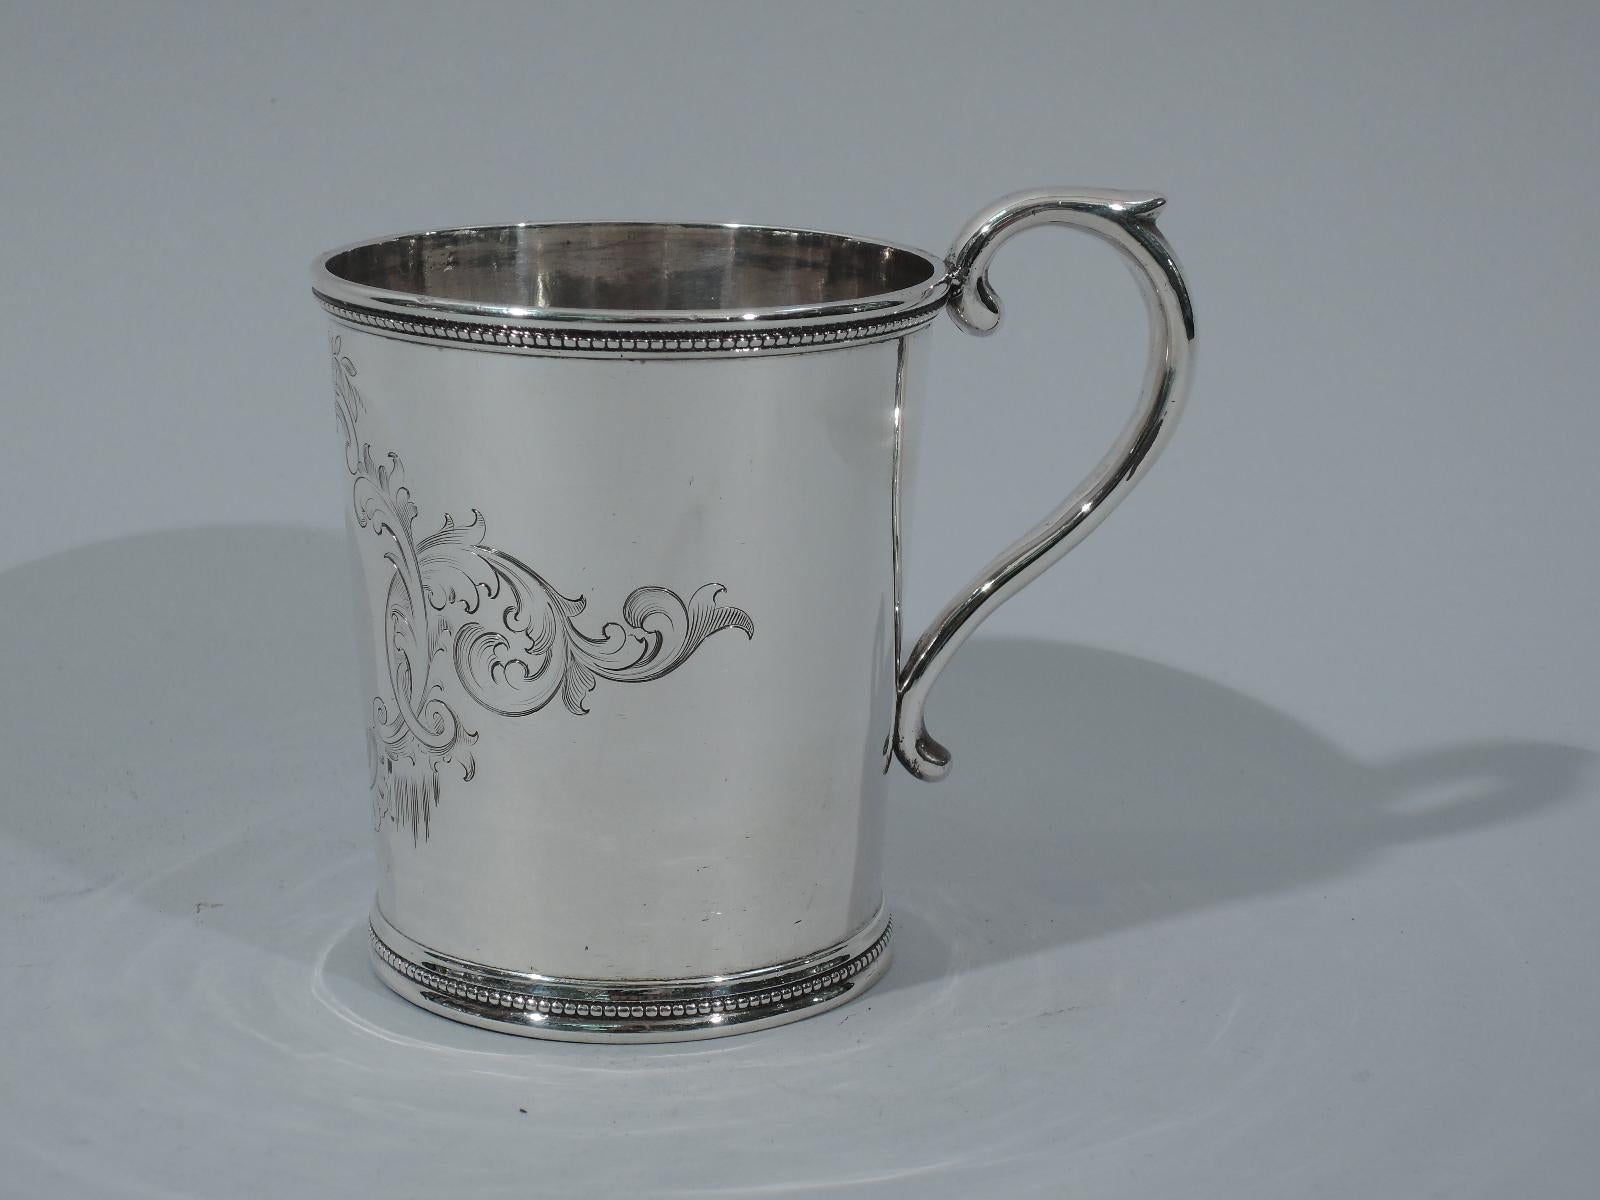 Early sterling silver baby cup. Made by Grosjean & Woodward for Tiffany & Co. at 550 Broadway. Straight and tapering sides and capped S-scroll handle. Beaded and molded rim and foot. Engraved cartouche (vacant) with fluid scrolls and flowers.